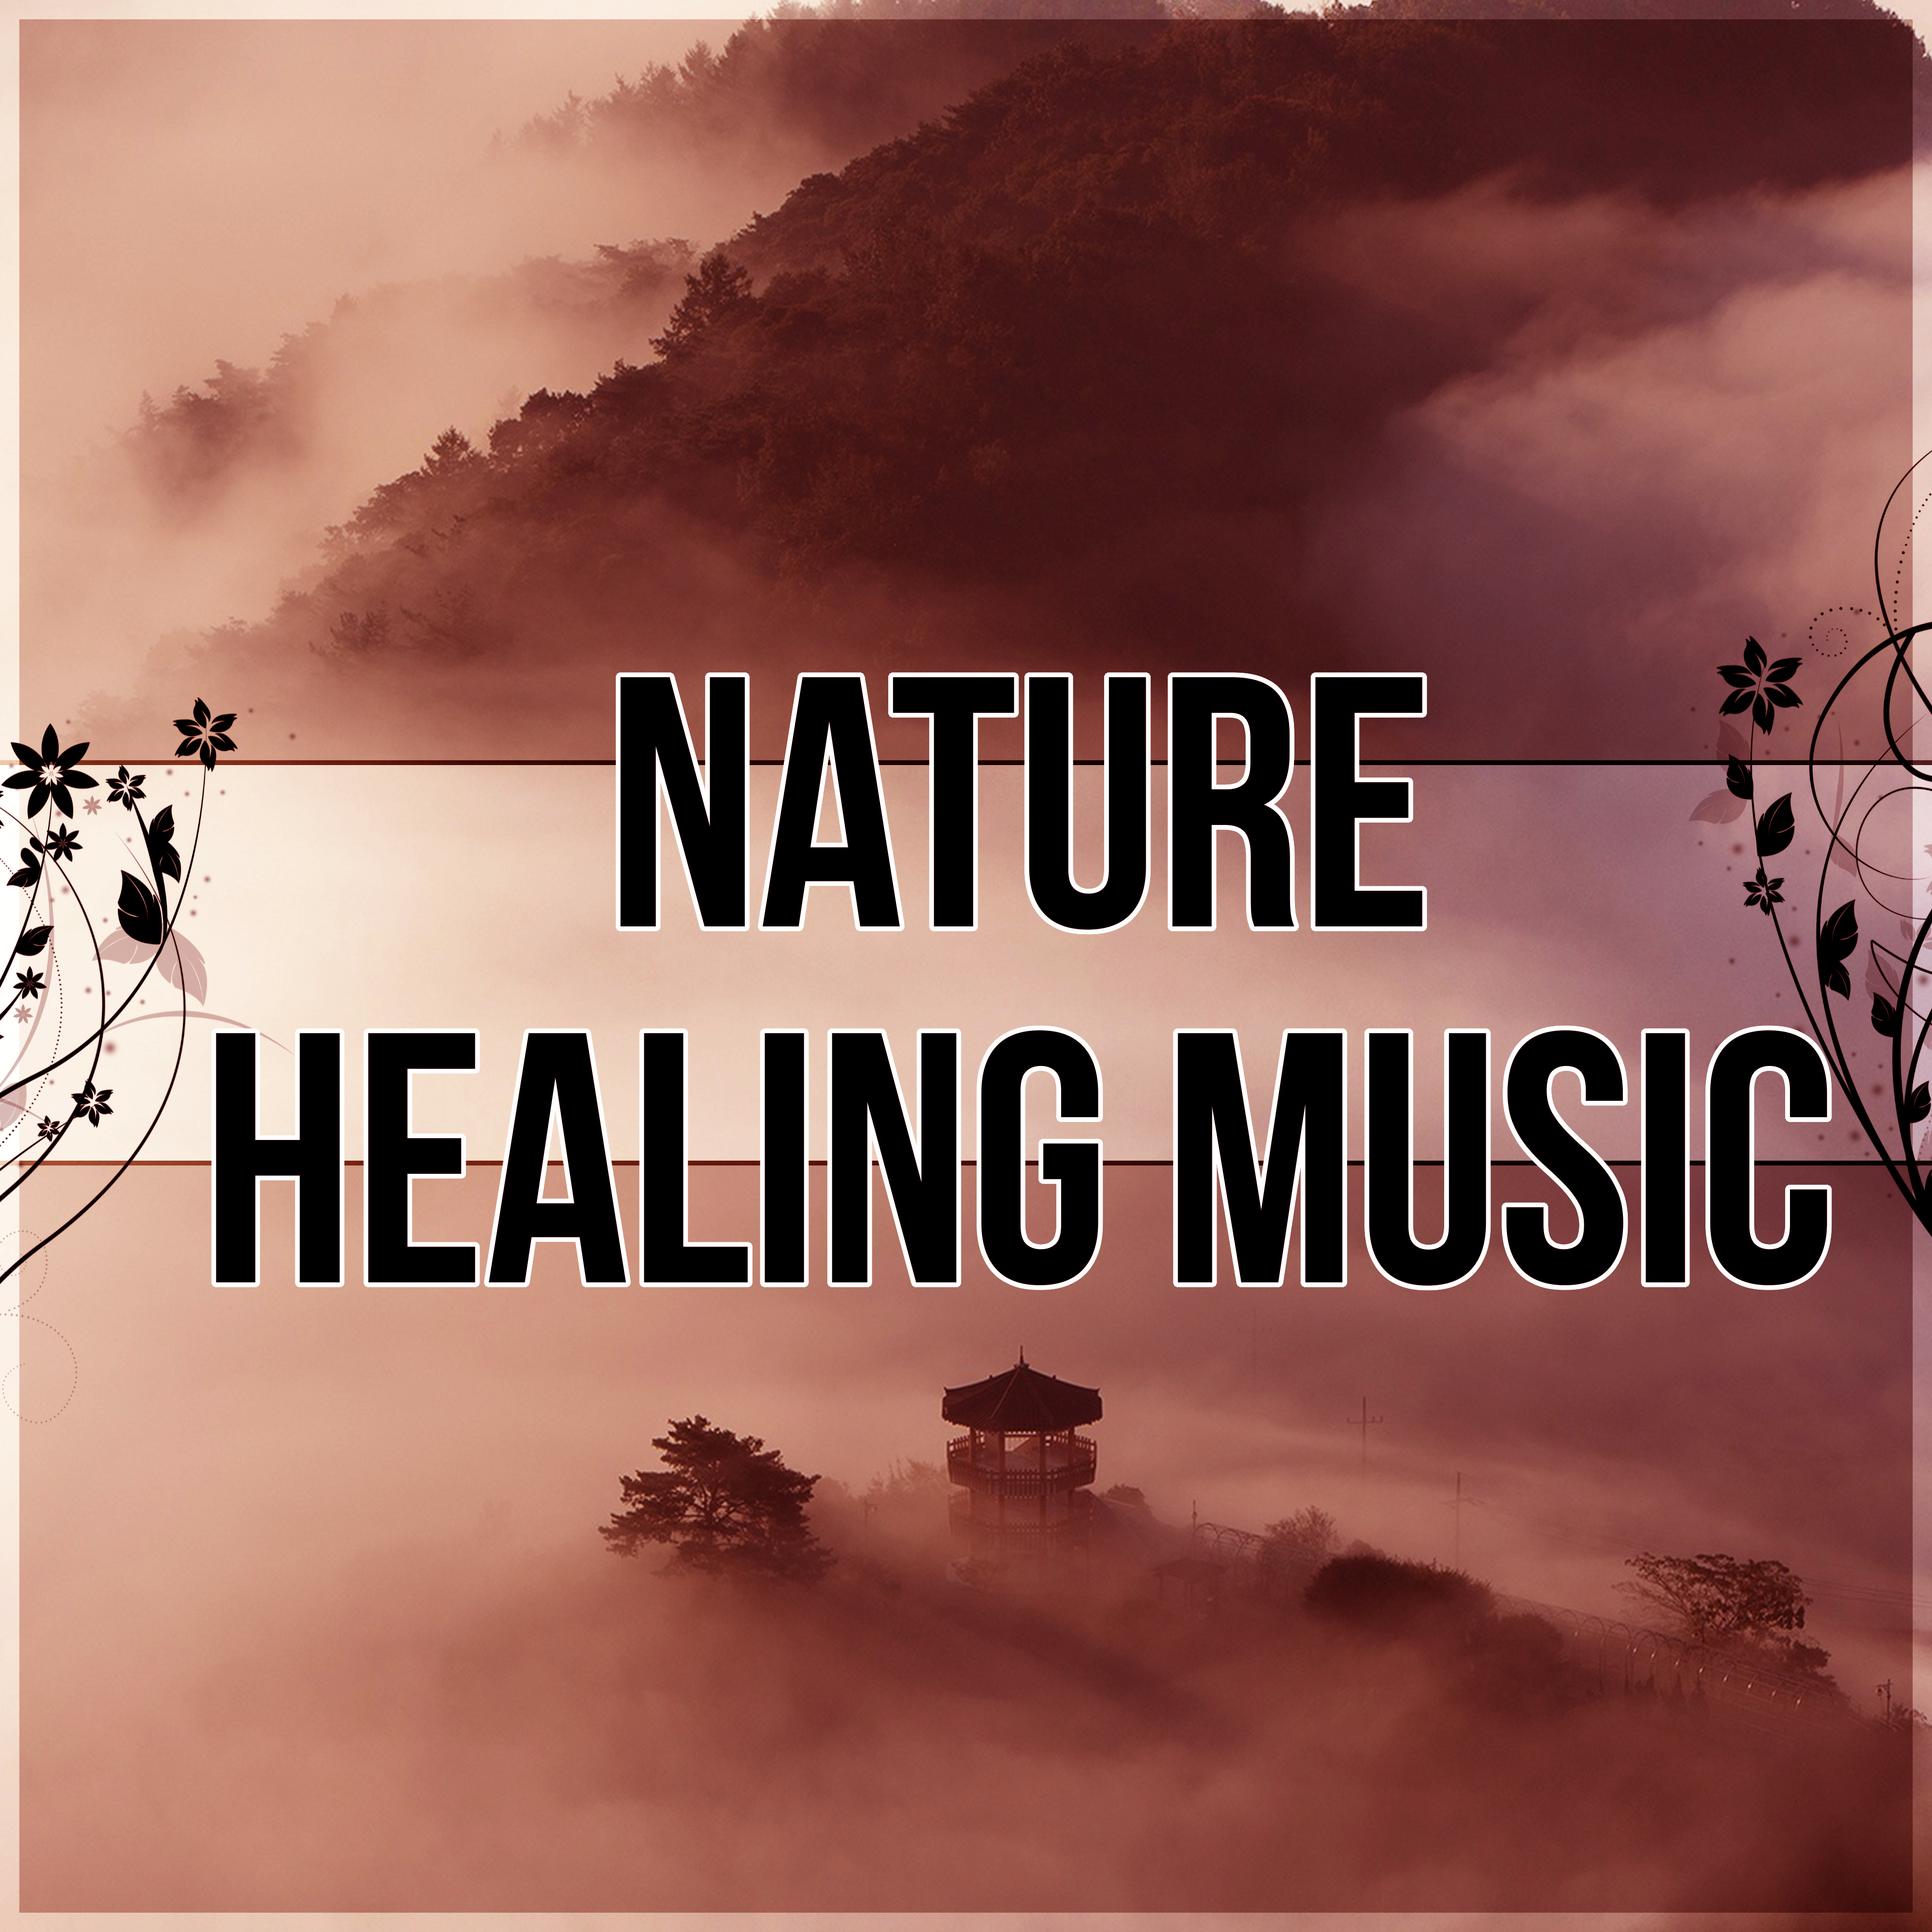 Nature Healing Music - Reiki Therapy, Massage Music, Inner Peace, Relaxation Meditation, Yoga, Spa Wellness, Regeneration, Body Therapy